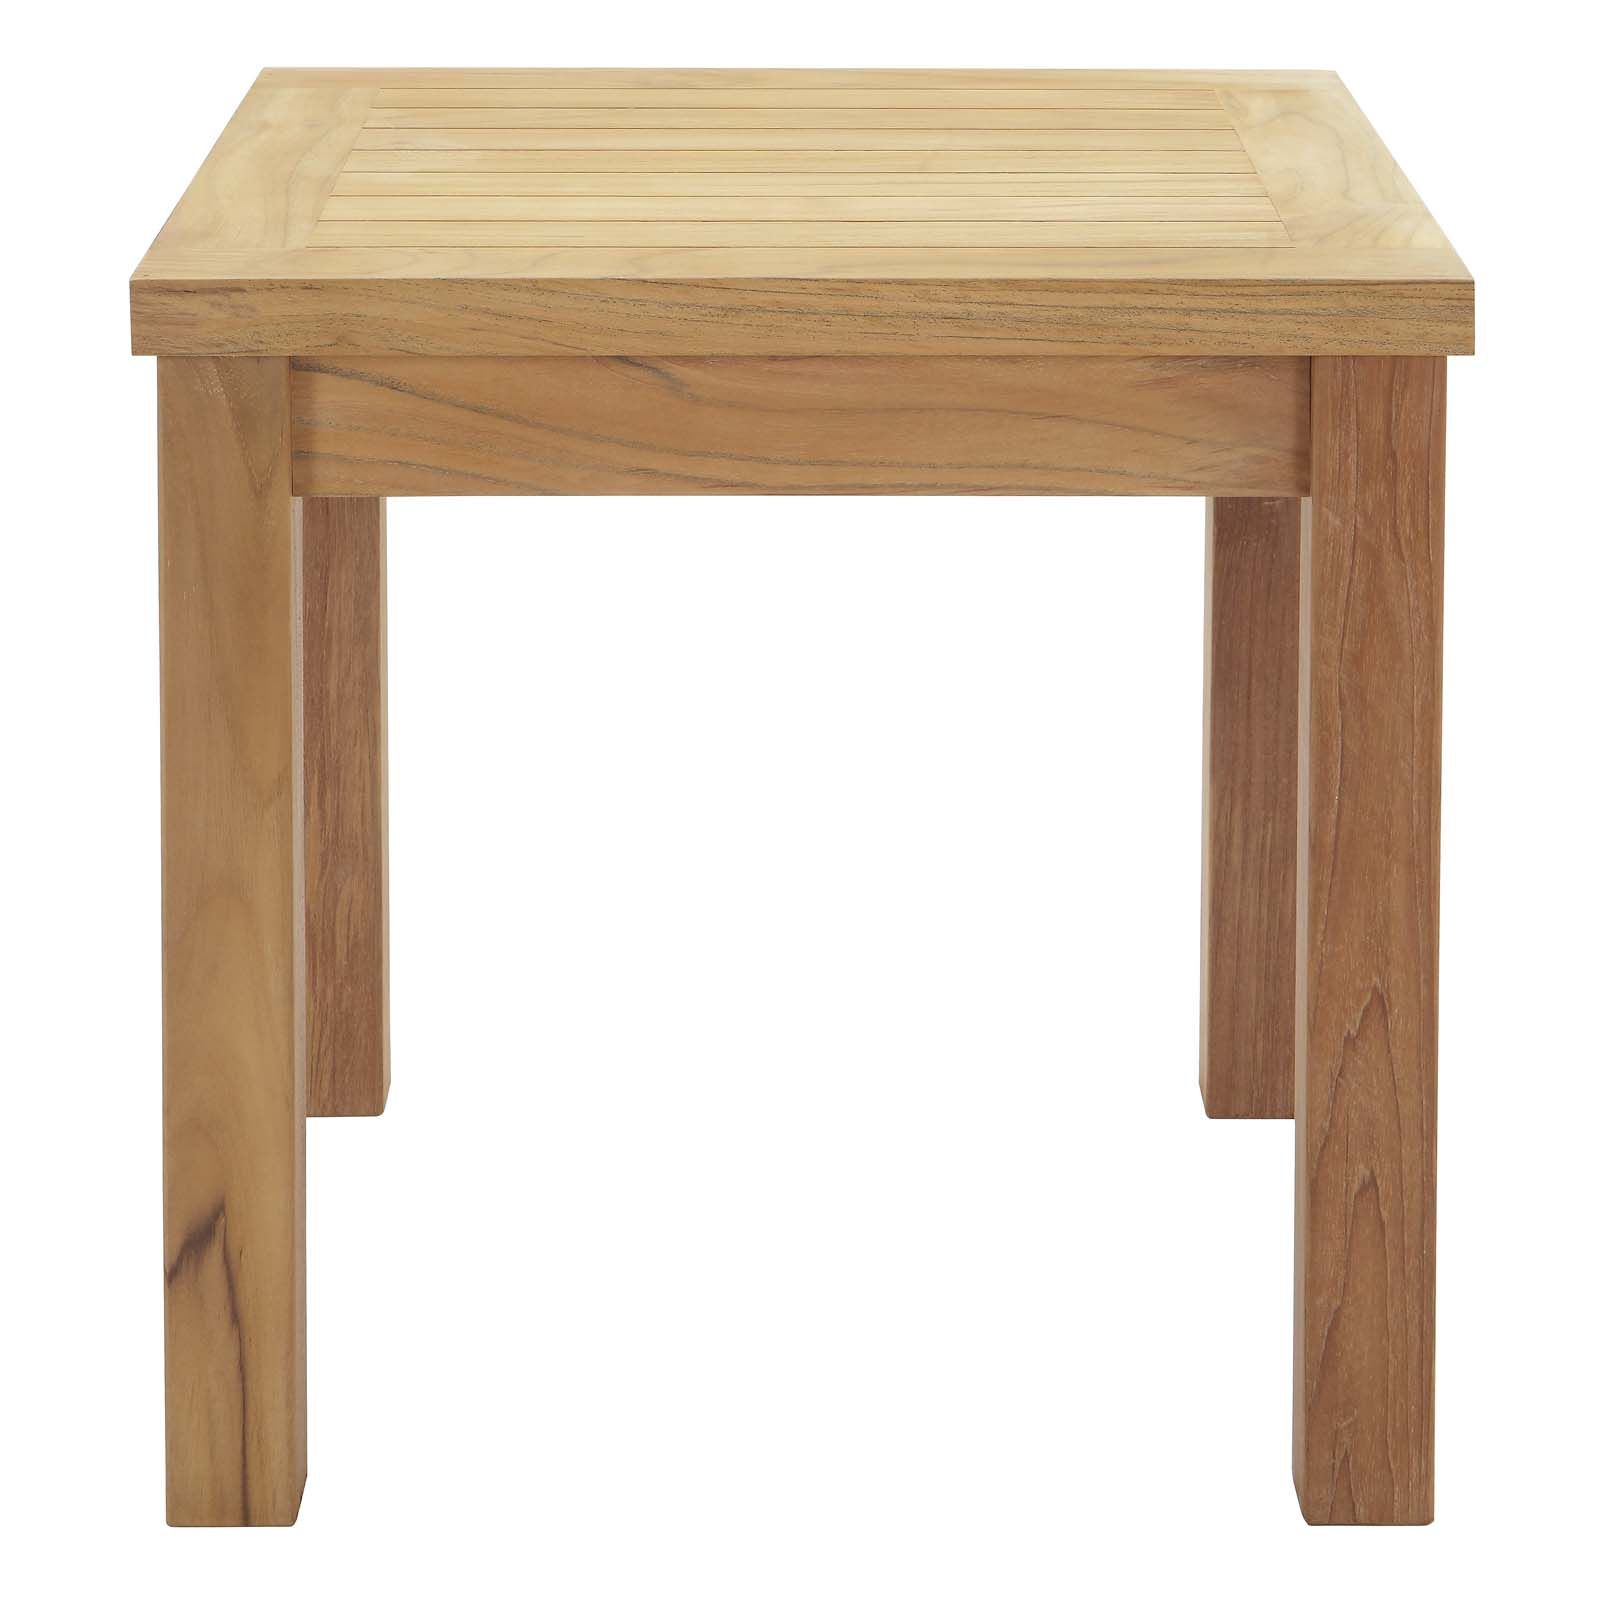 Marina Outdoor Patio Teak Side Table Natural Pertaining To Well Known Natural Wood Outdoor Side Tables (View 5 of 15)